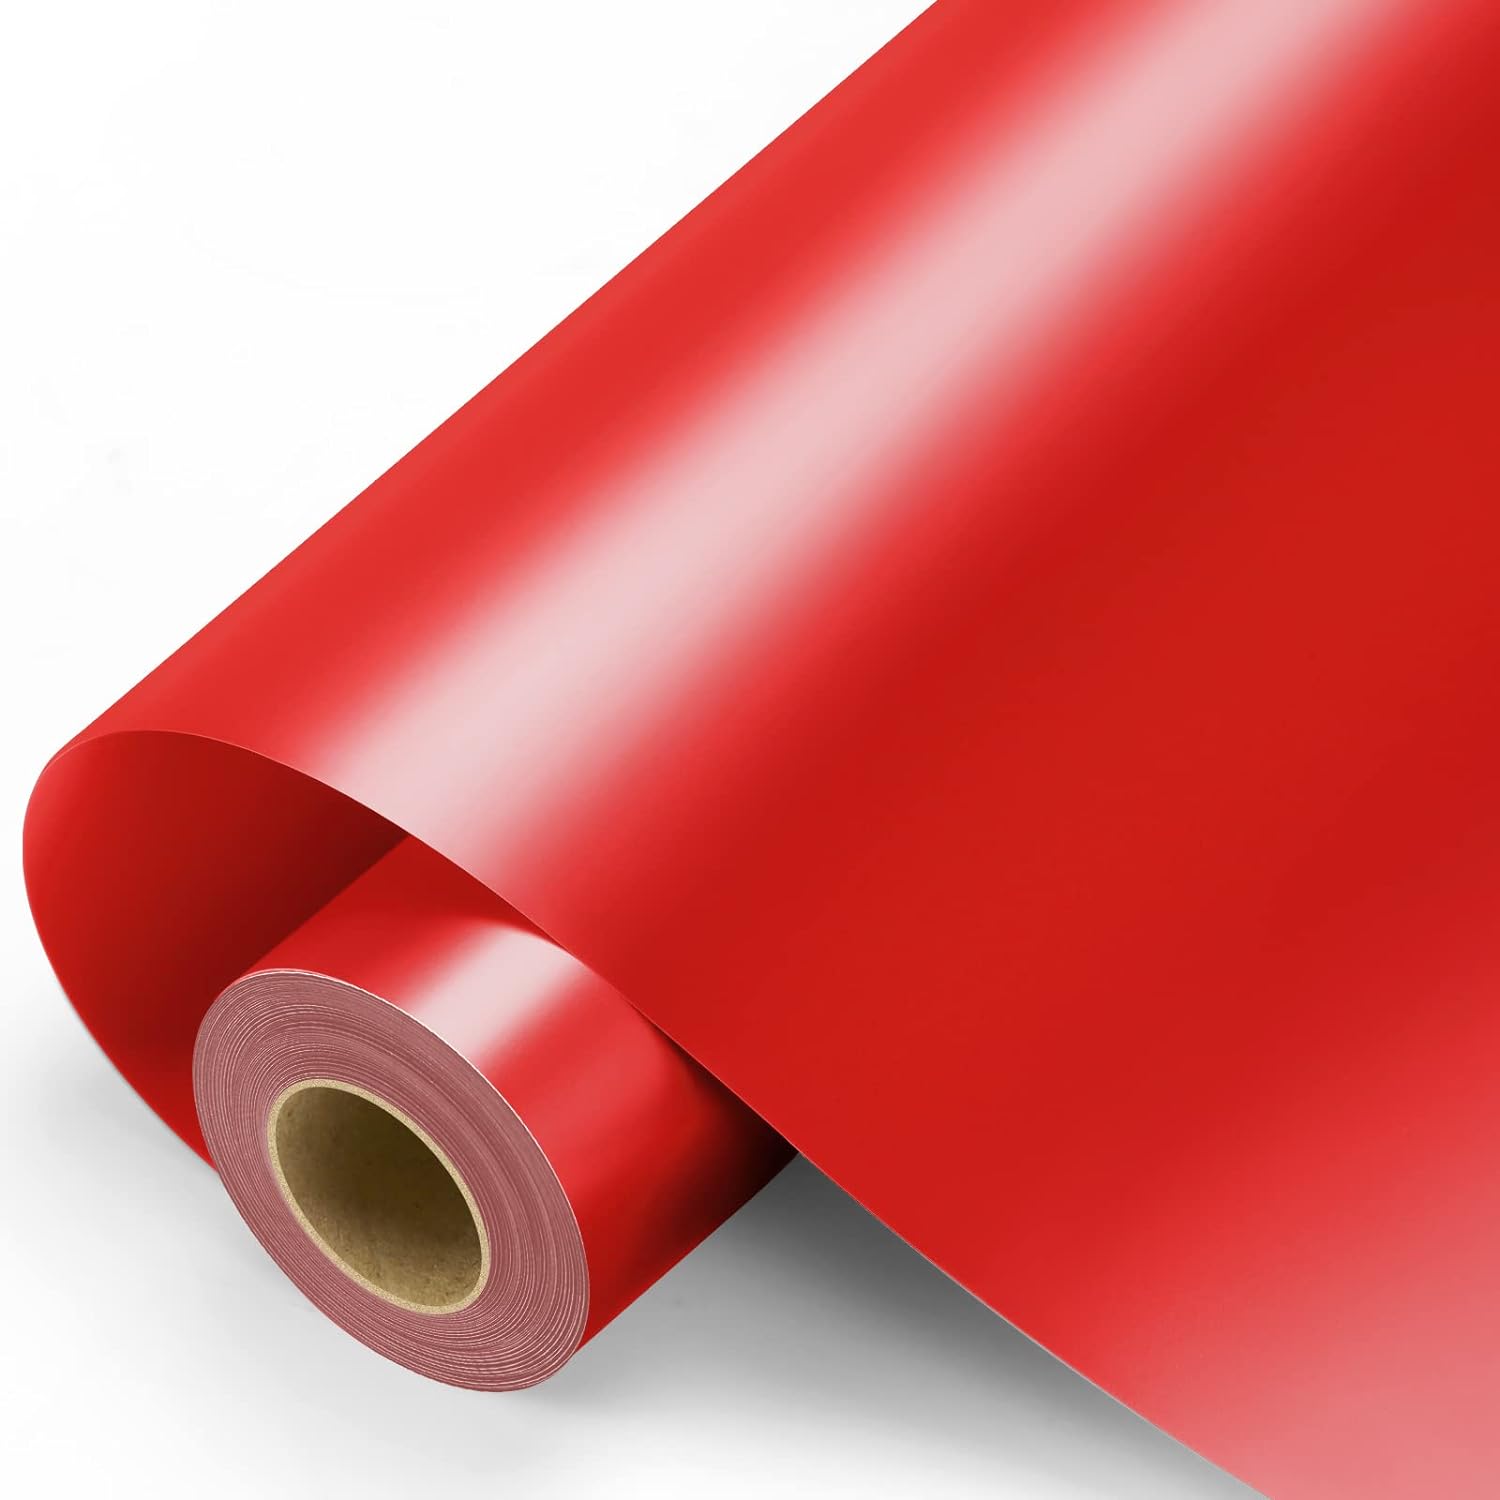 Red Permanent Vinyl - 12 x 11FT Red Vinyl with PET Backing Easy to Weed, Adhesive Vinyl Roll for All Cutting Machine, Permanent Outdoor Vinyl for Home Decor, Car Decal, Scrapbooking, Glossy